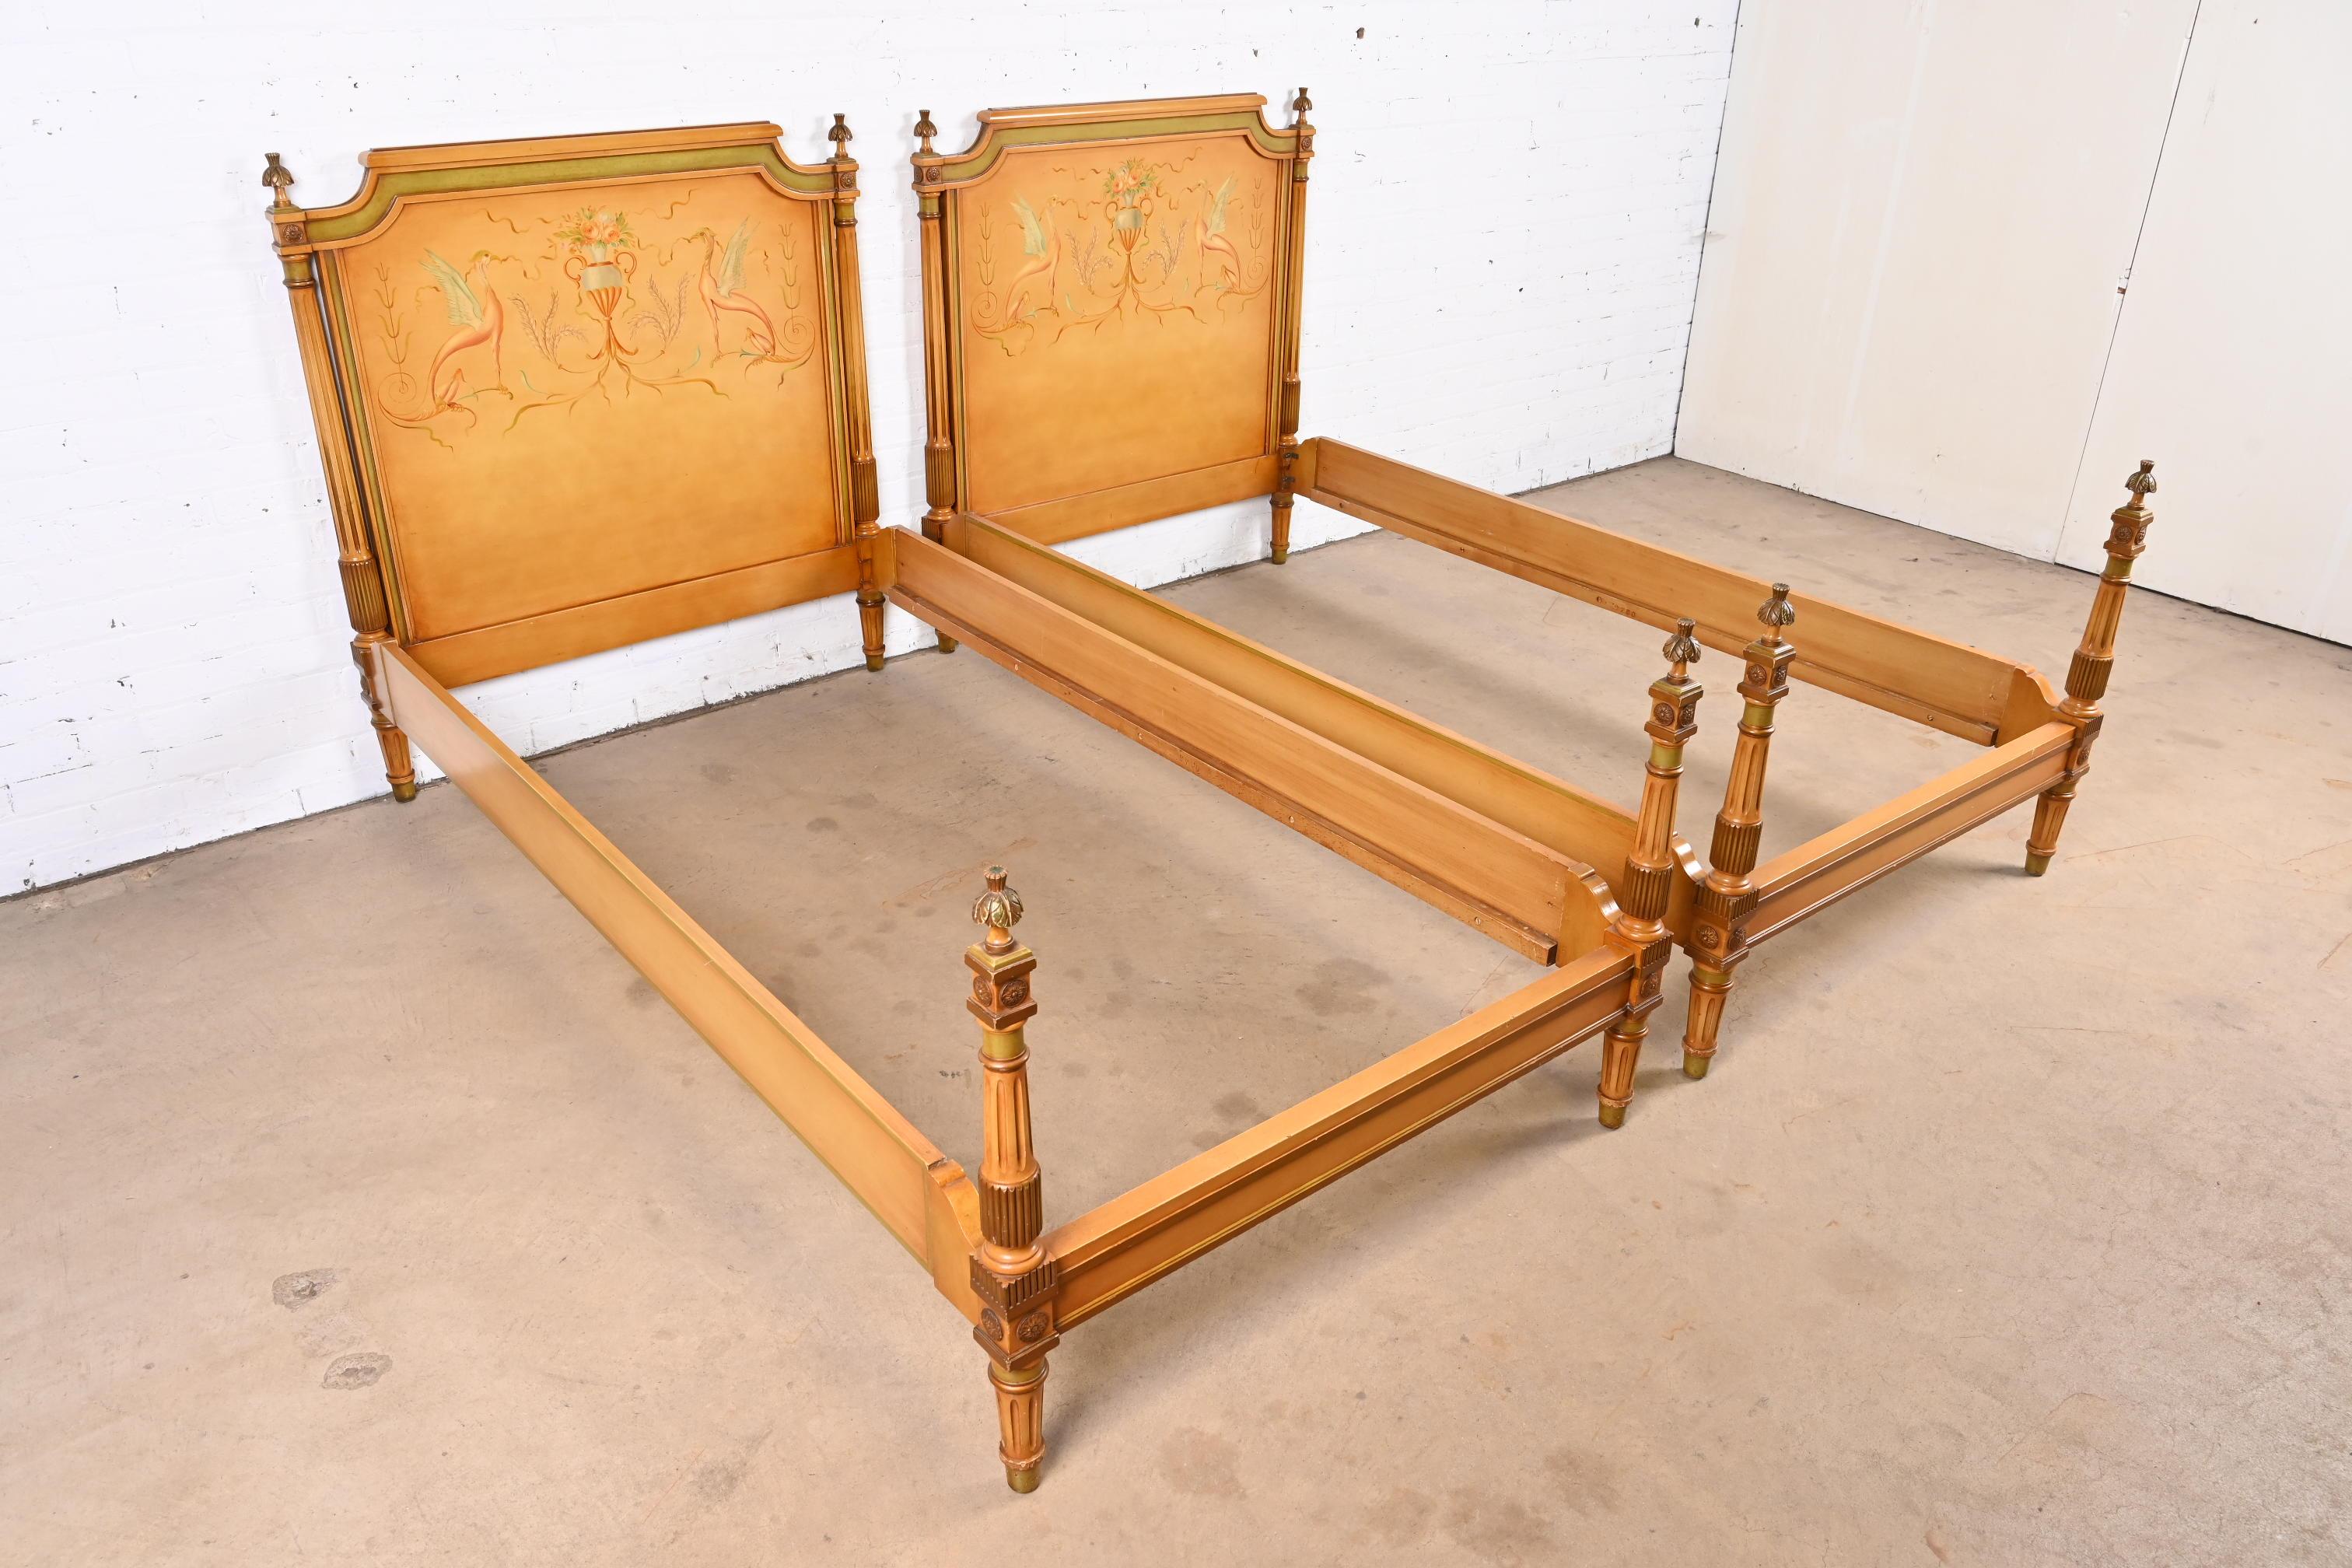 Mahogany Neoclassical Painted Parcel-Gilt Twin Size Beds in the Manner of Grosfeld House